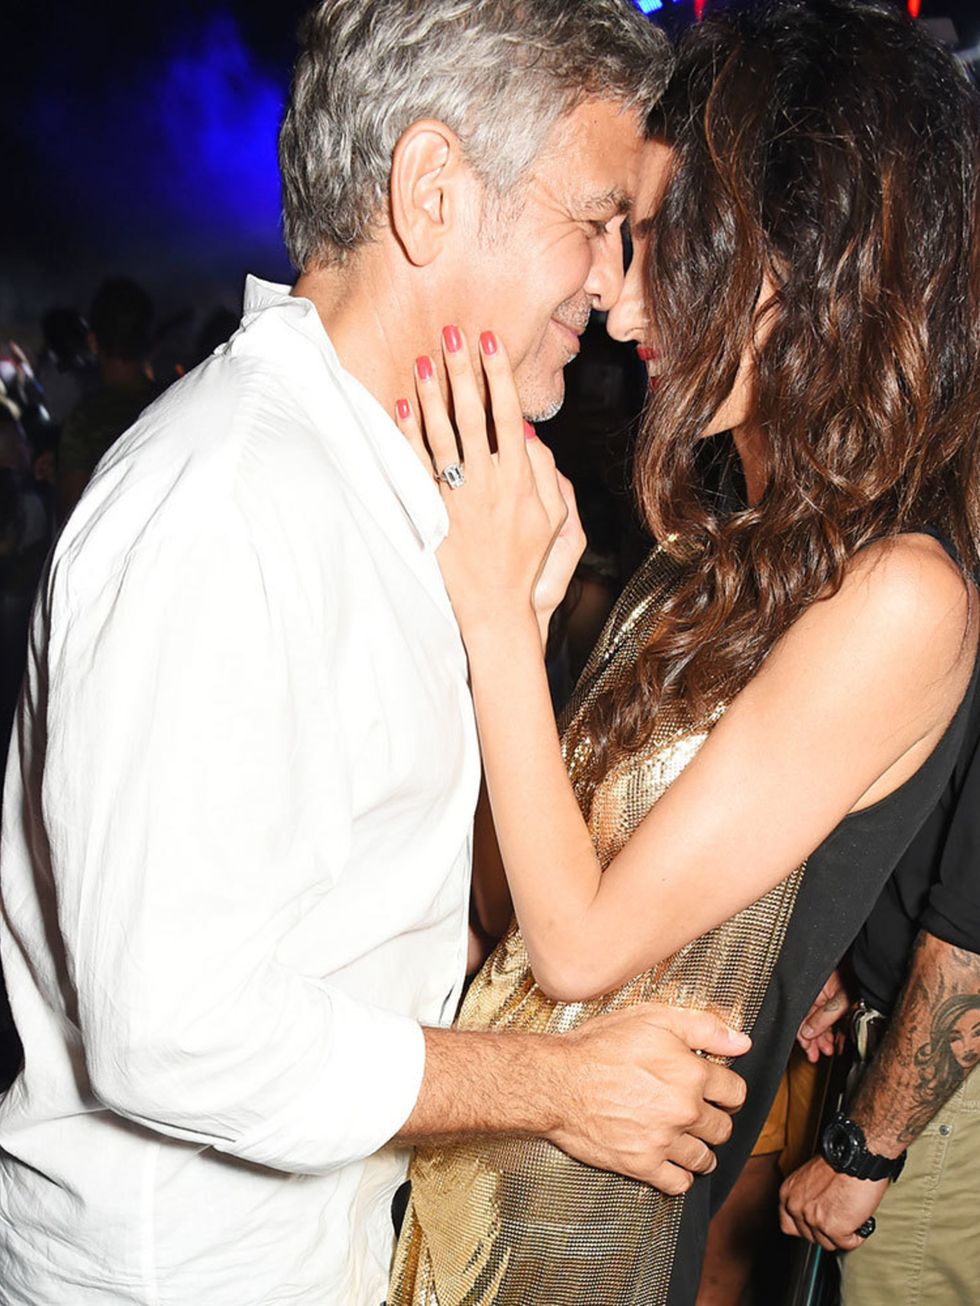 Amal and George Clooney attend the official launch of Casamigos Tequila in Ibiza and Spain at Ushuaia Ibiza Beach Hotel